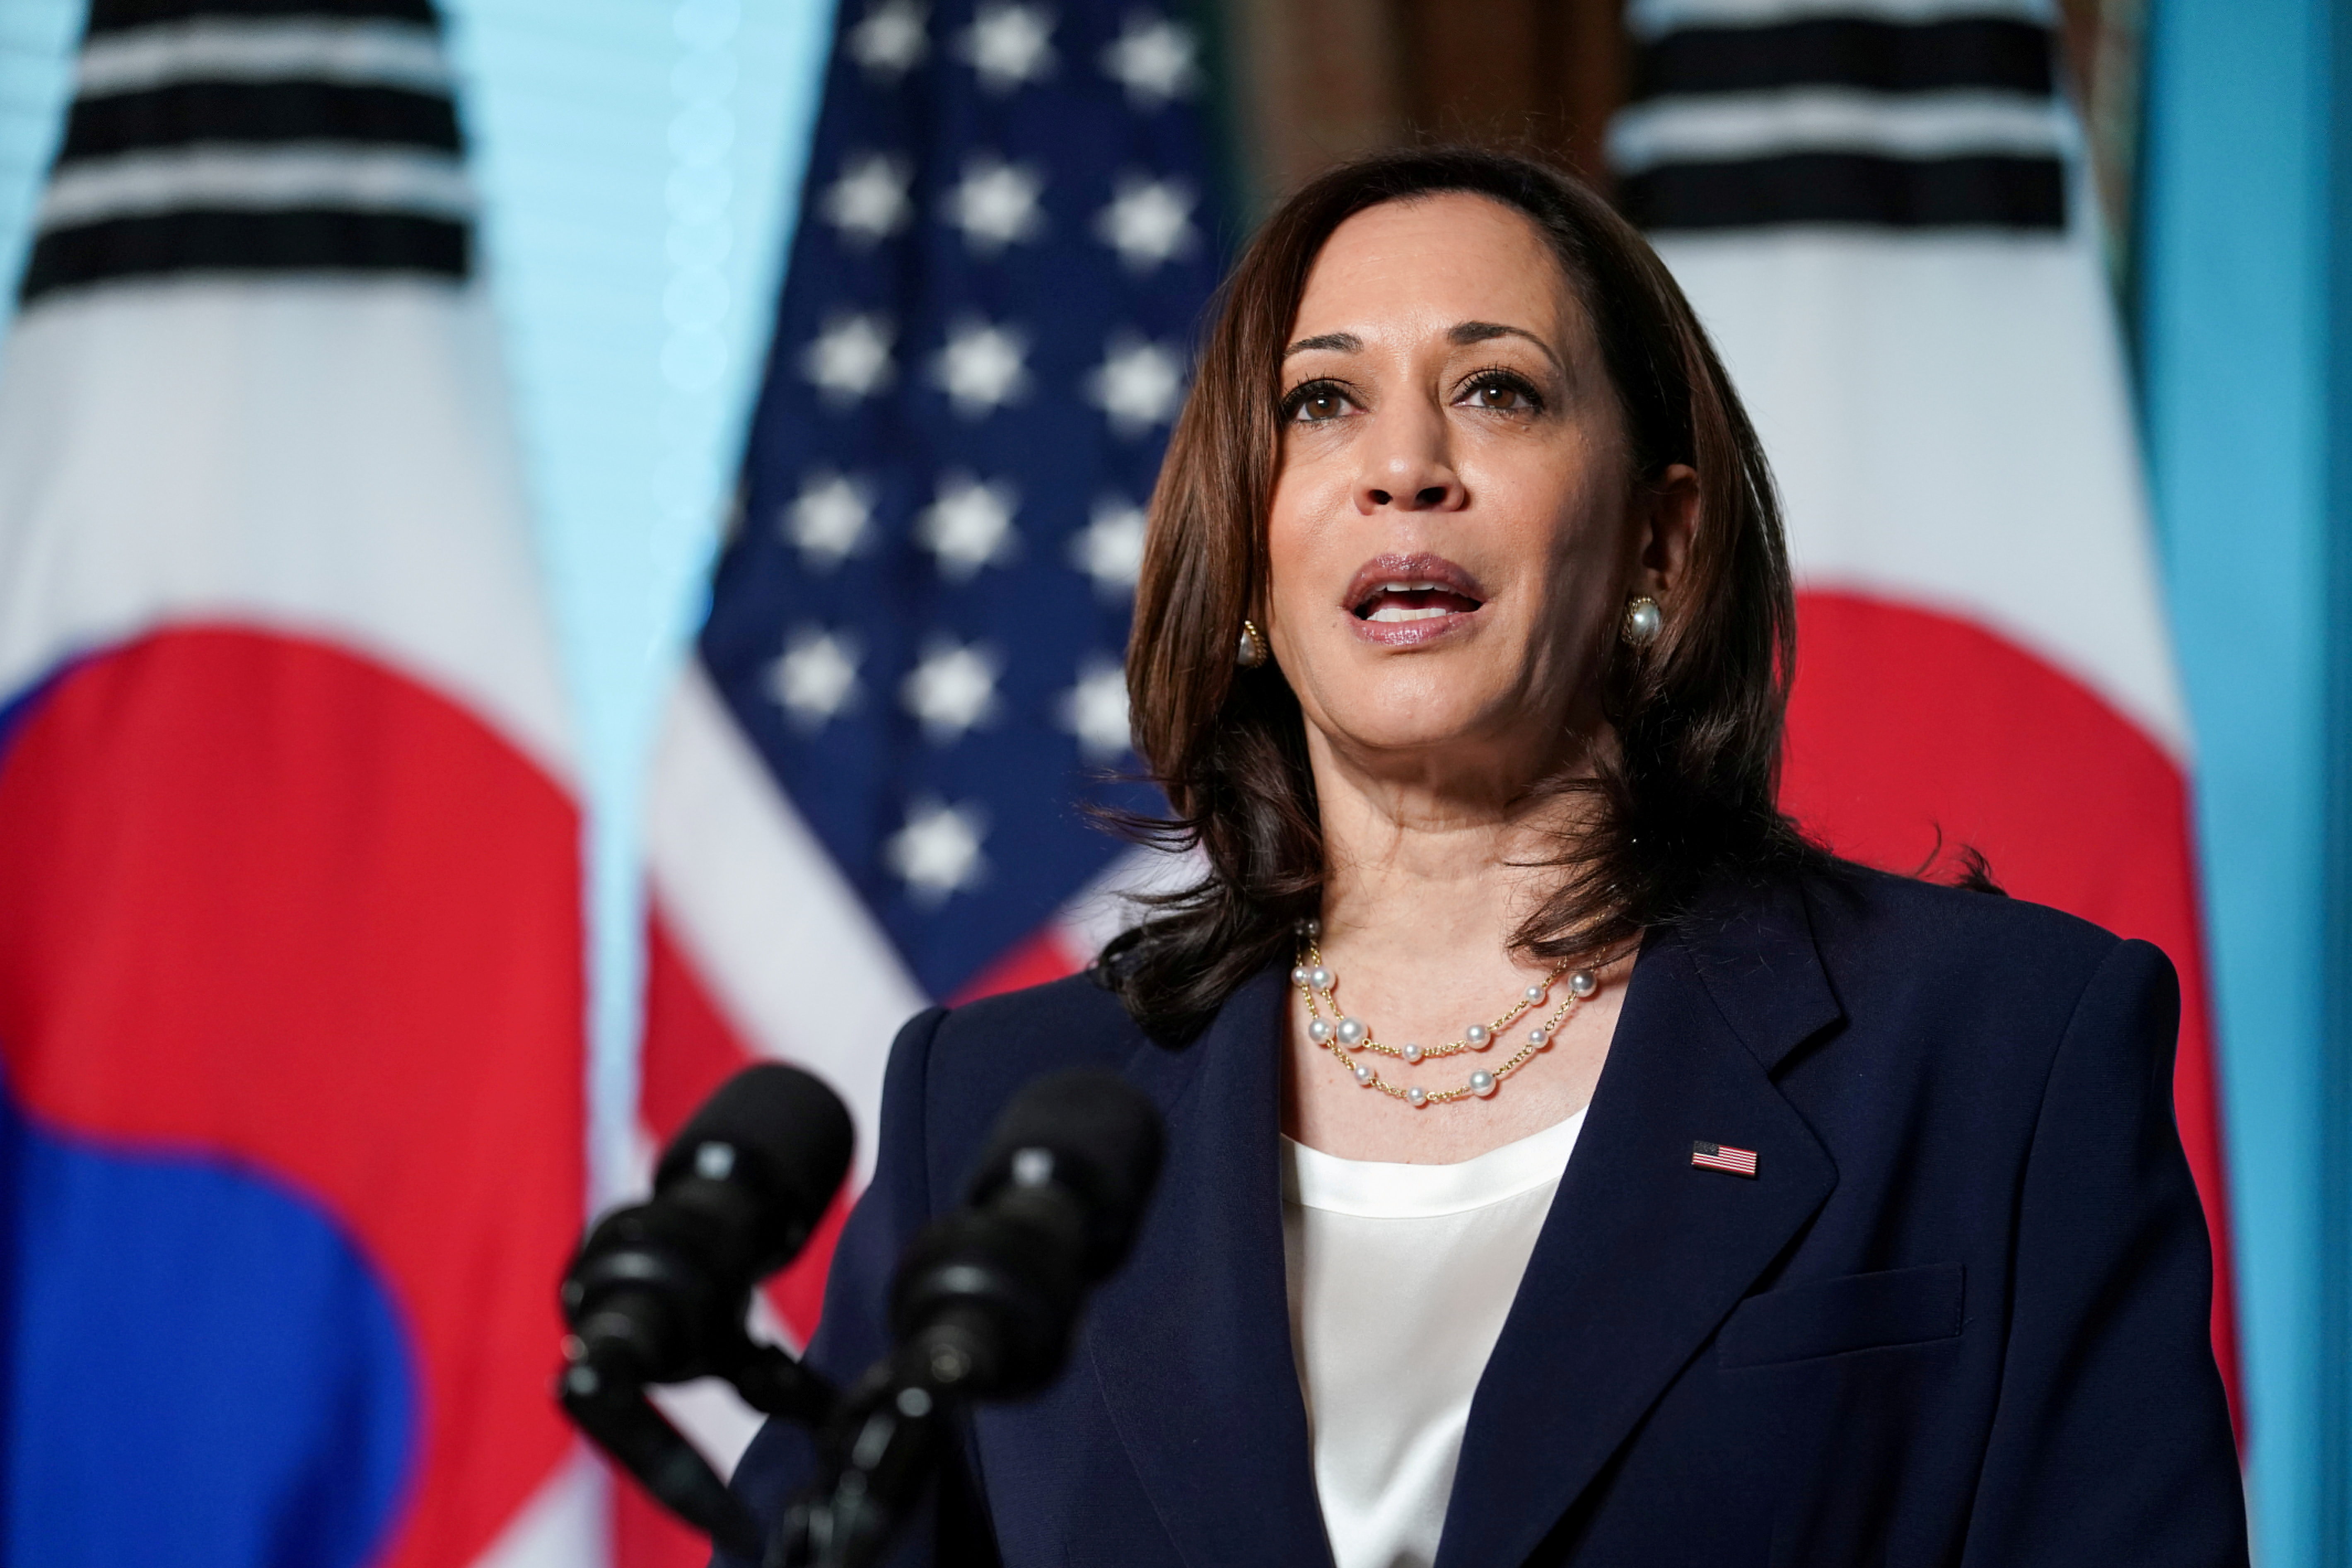 U.S. Vice President Kamala Harris delivers remarks before participating in a bilateral meeting with South Korean President Moon Jae-in at the Eisenhower Executive Office Building near the White House in Washington, U.S., May 21, 2021. REUTERS/Sarah Silbiger/File Photo